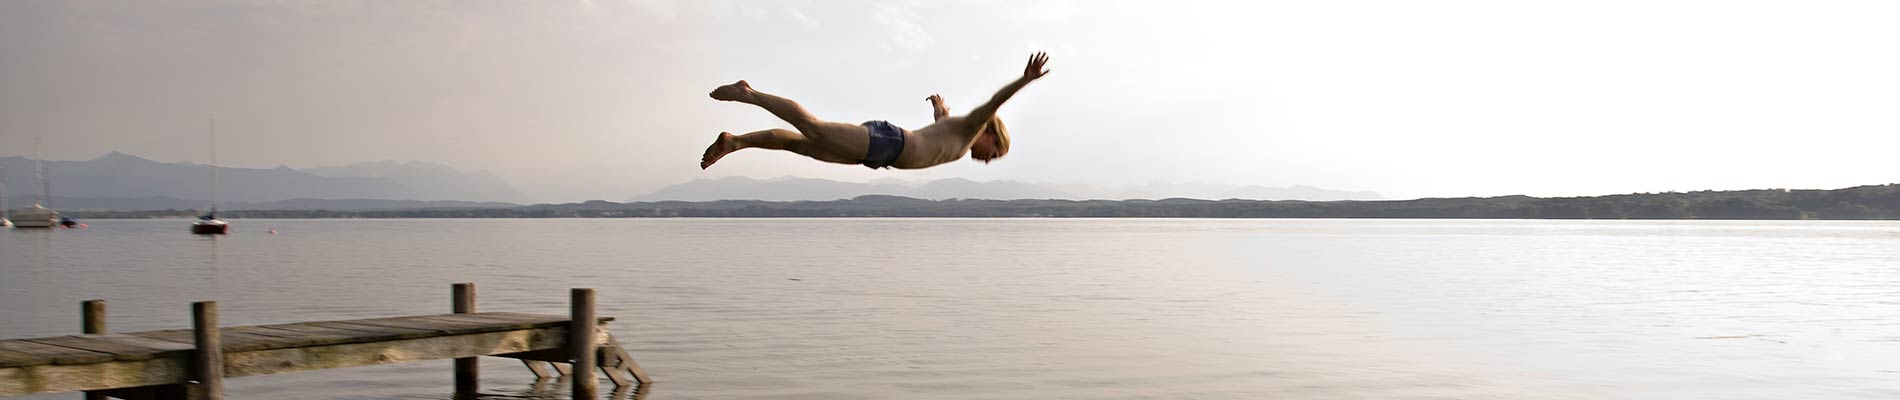 A young man diving off of a dock into a lake